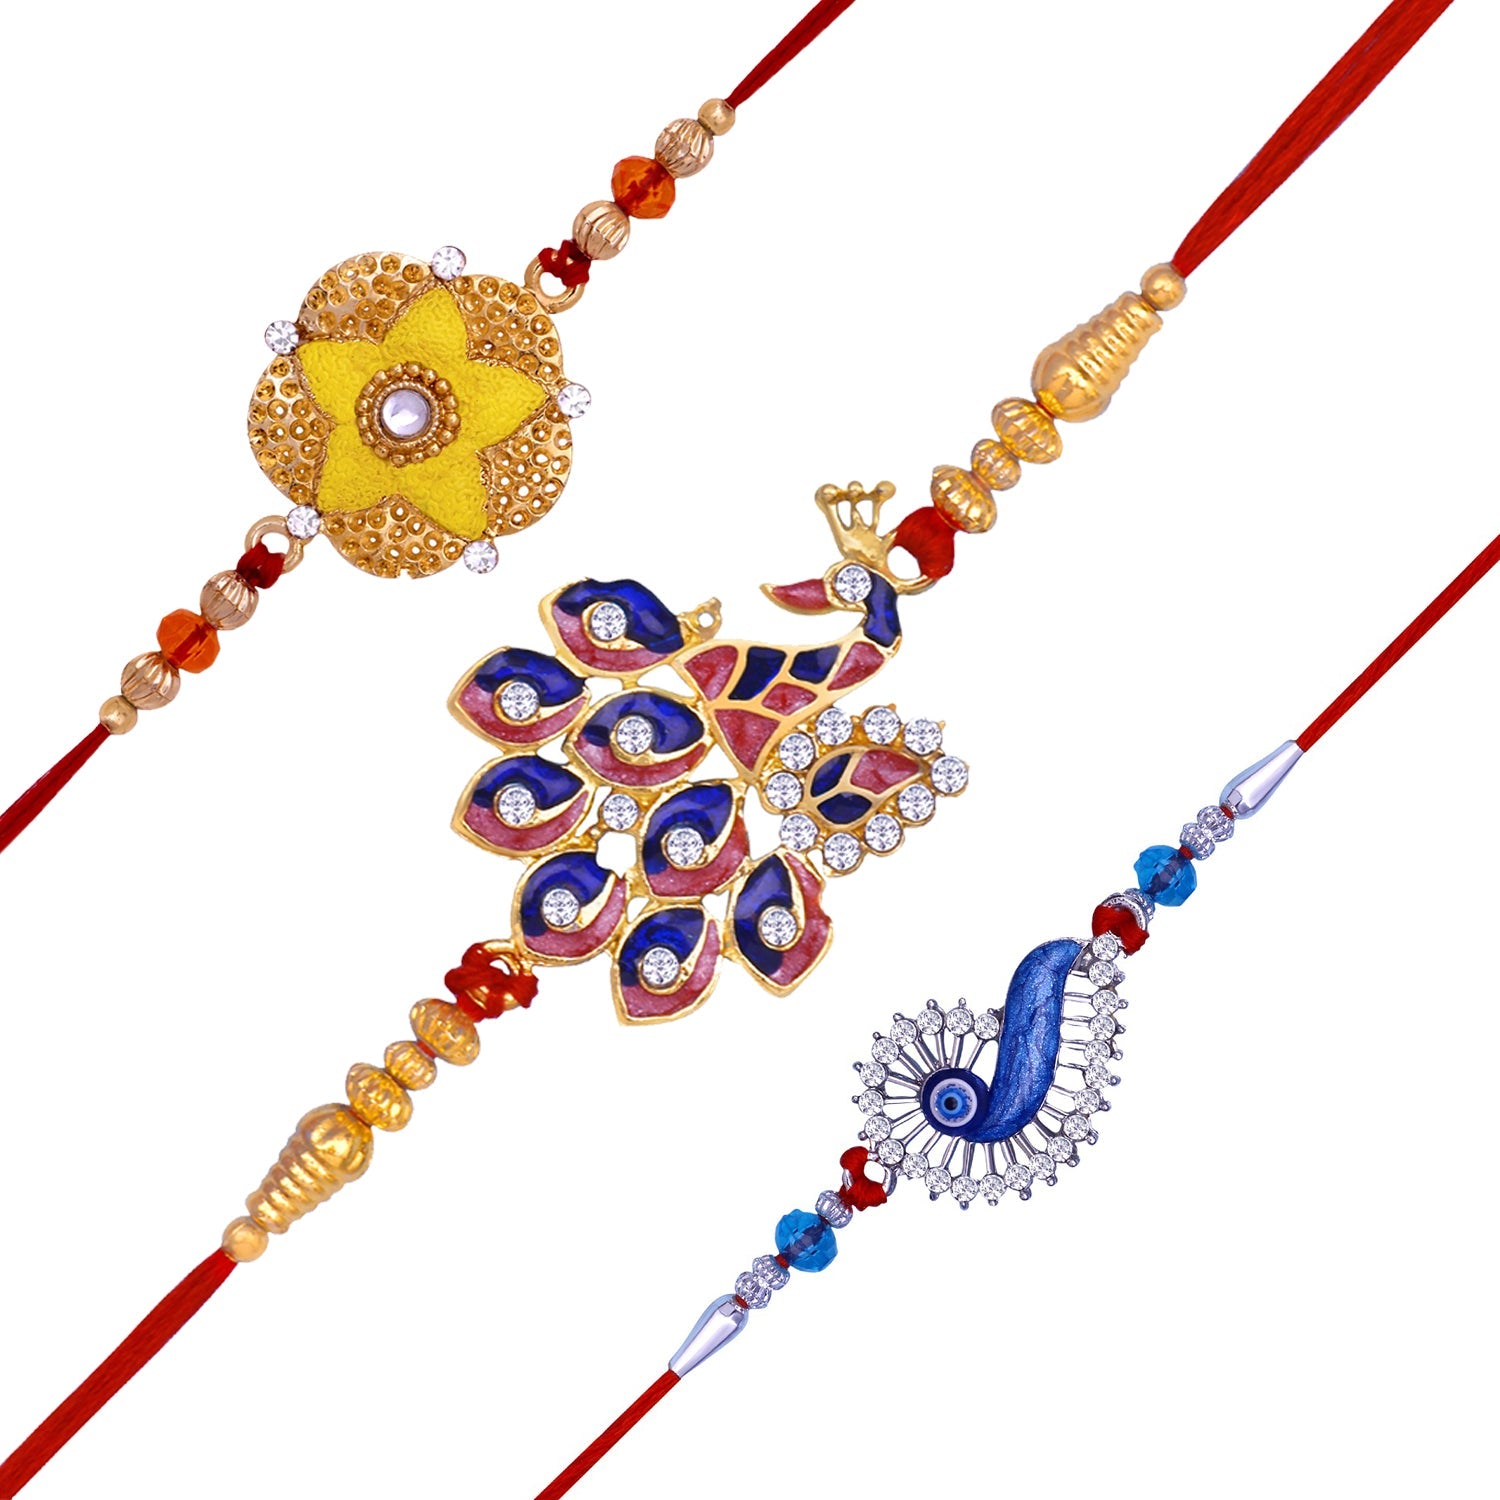 Mahi Combo of Floral, Evil Eye and Peacock Shaped Rakhi's with Meenakari Work and Crystals for Brother's (RCO1105535M)